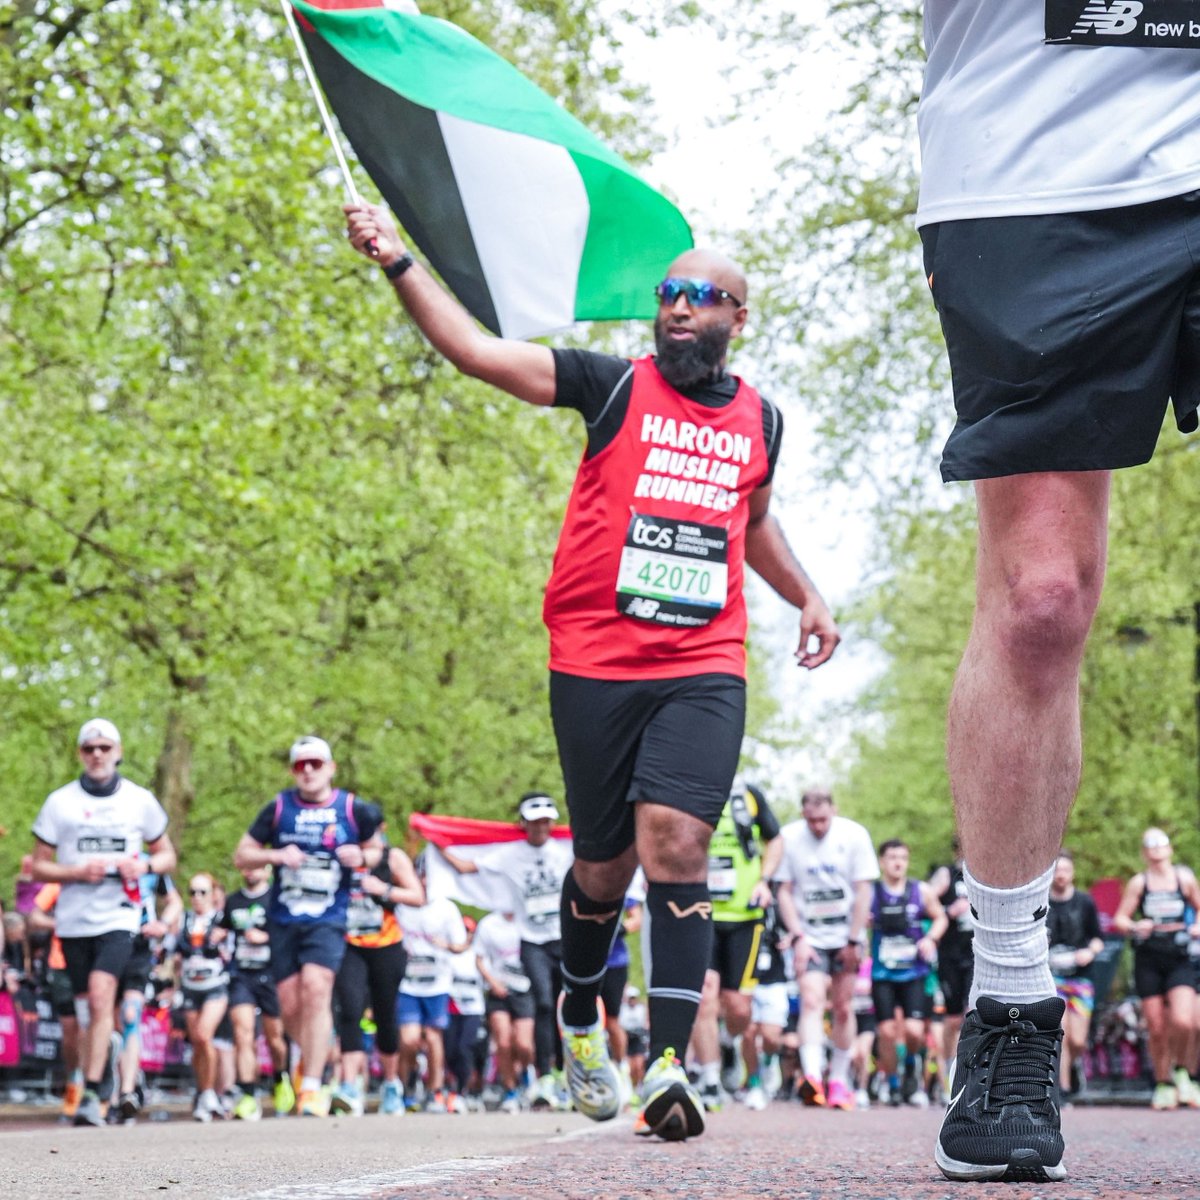 London Marathon 2024 - the one we'll never forget! I run for the voiceless, for the oppressed, for #Palestine. With each step, I defy silence, amplifying the call for justice. #LondonMarathon #EndTheOccupation #StopTheGenocide 🇵🇸✊